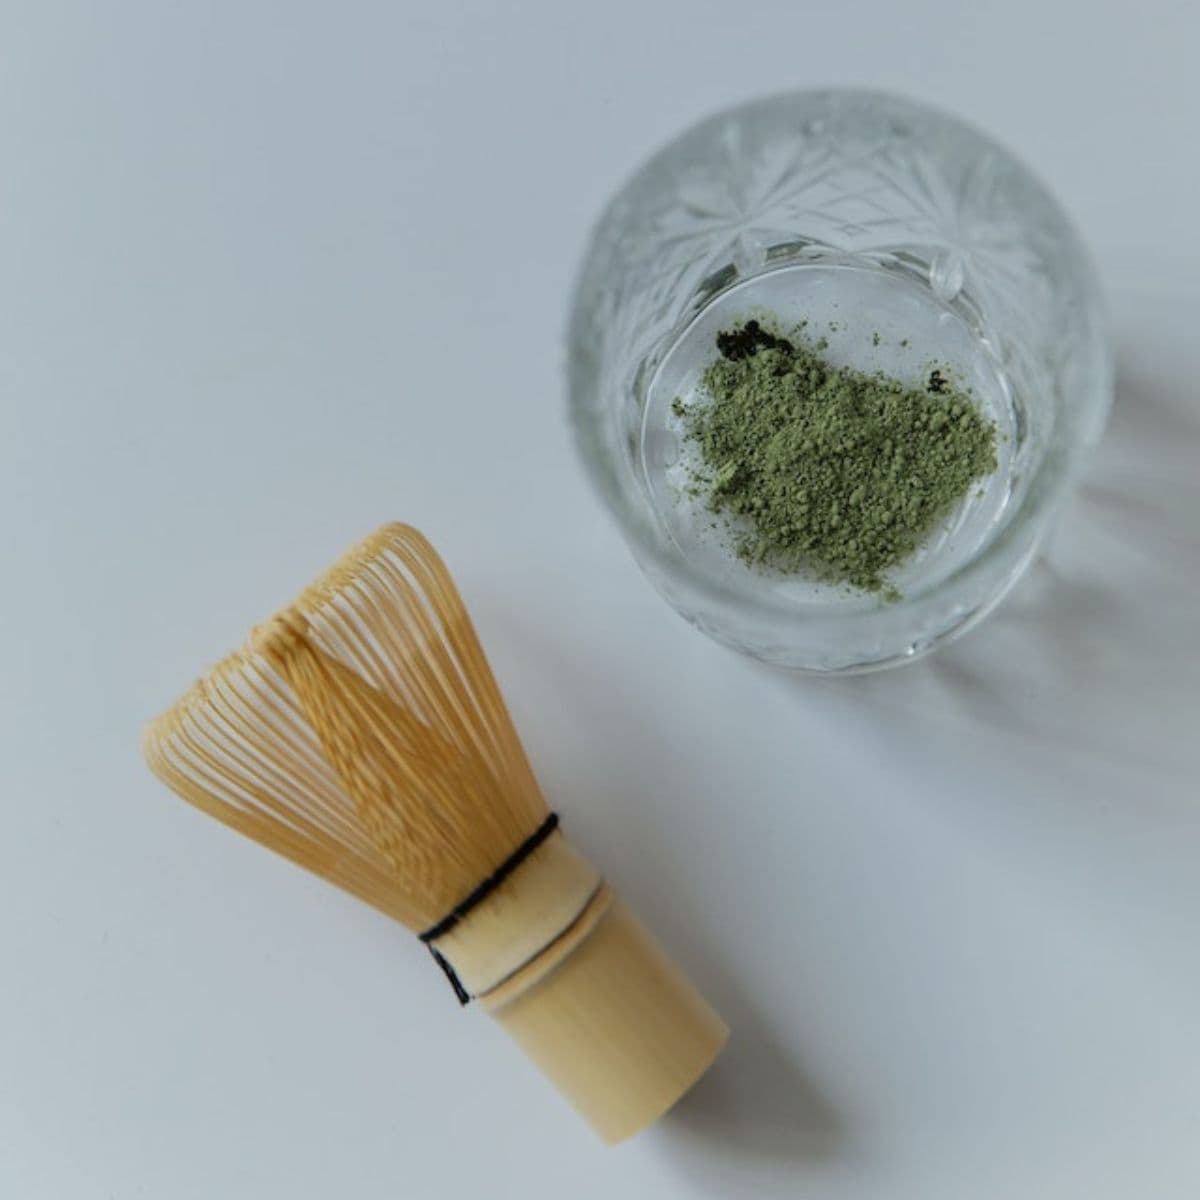 Transparent glass with matcha powder and a bamboo whisk